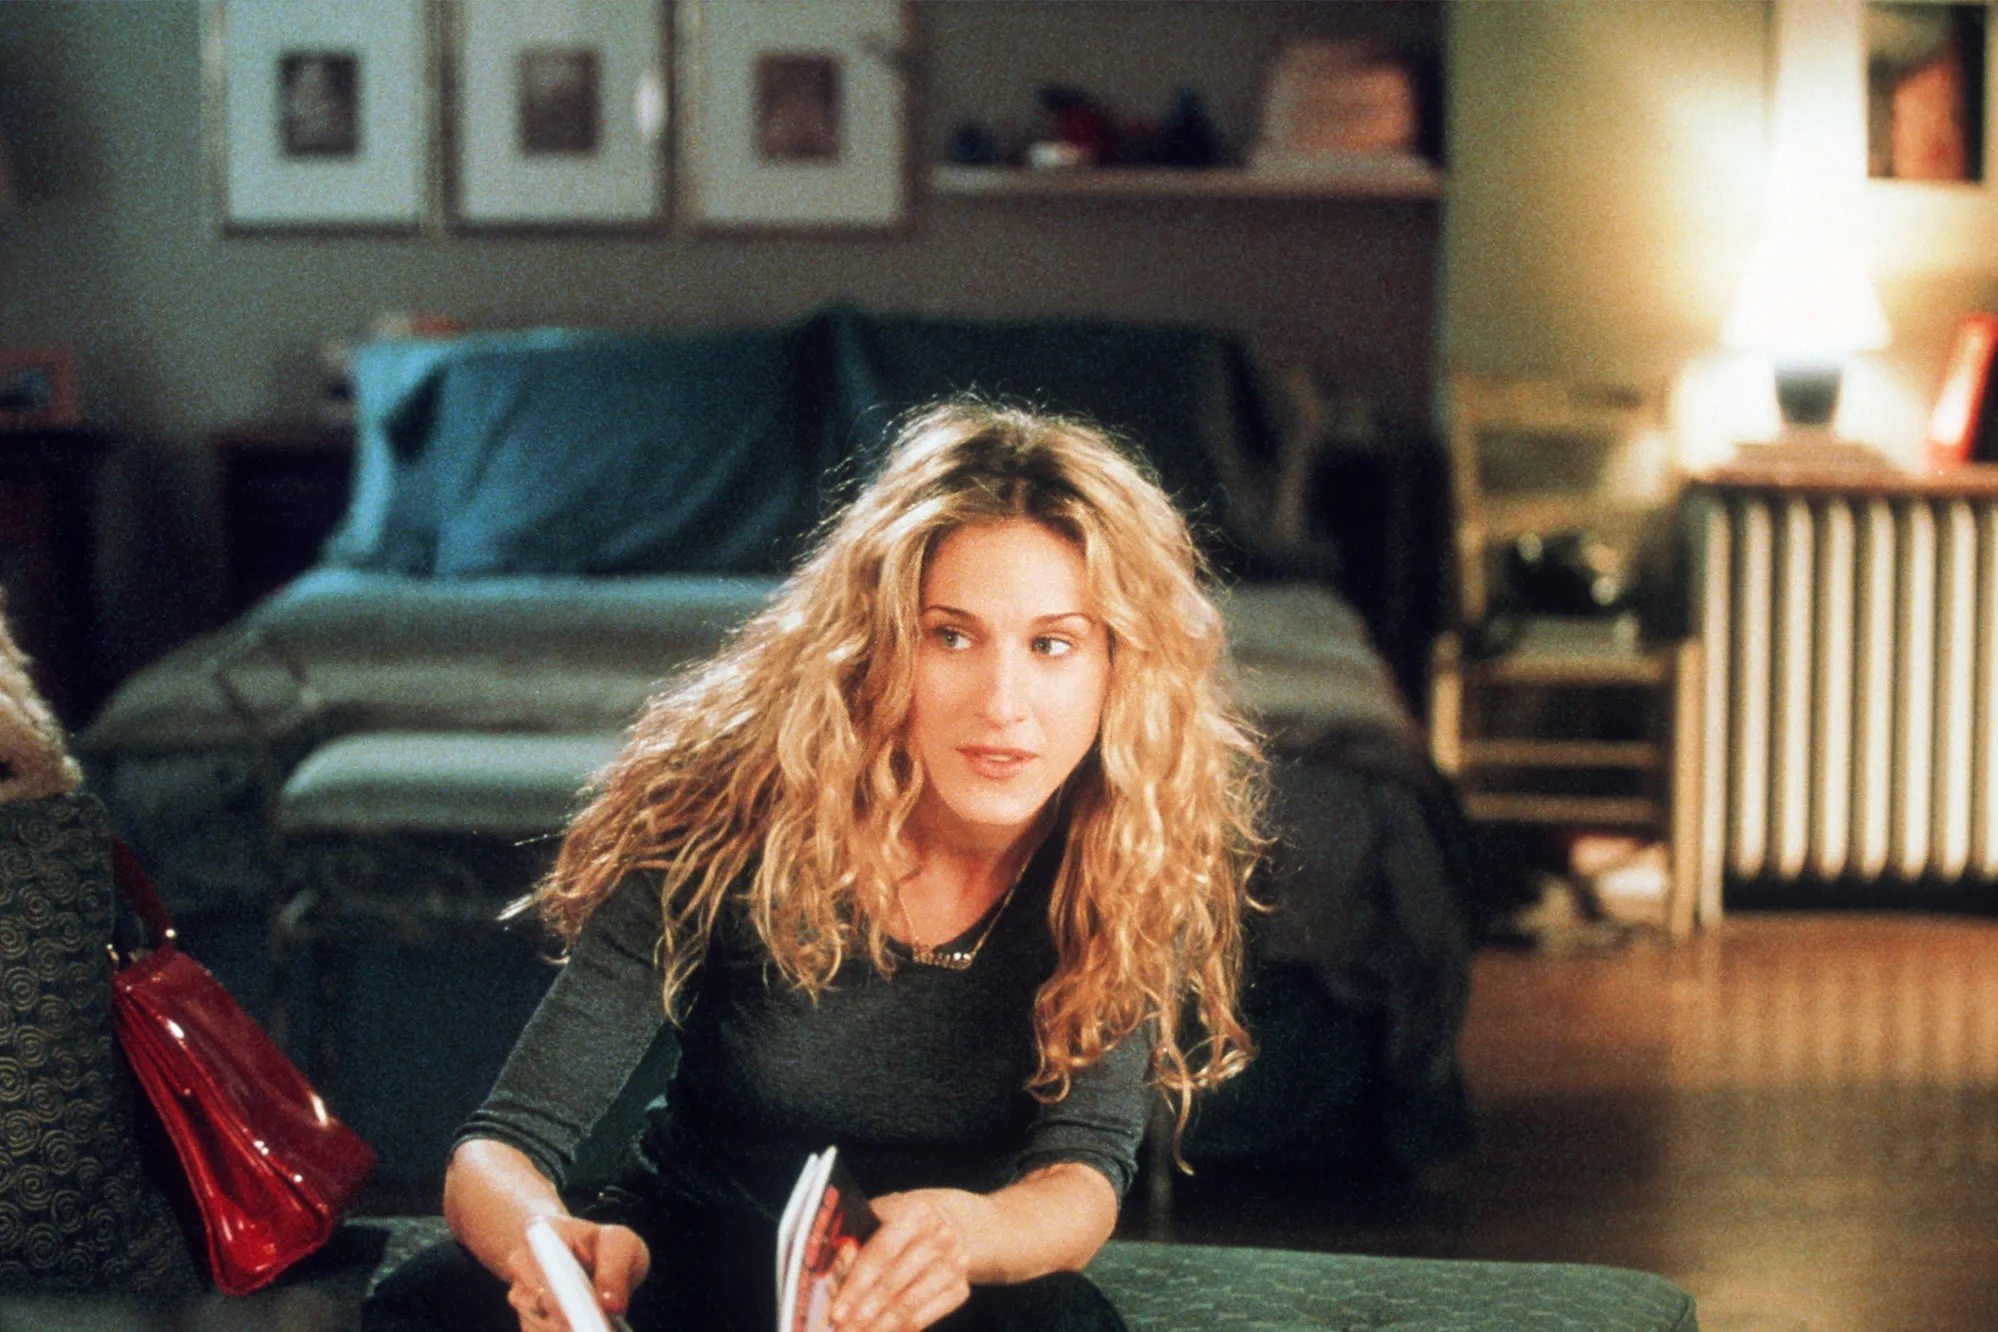 carrie-bradshaw-apartment-site-story-image.jpg